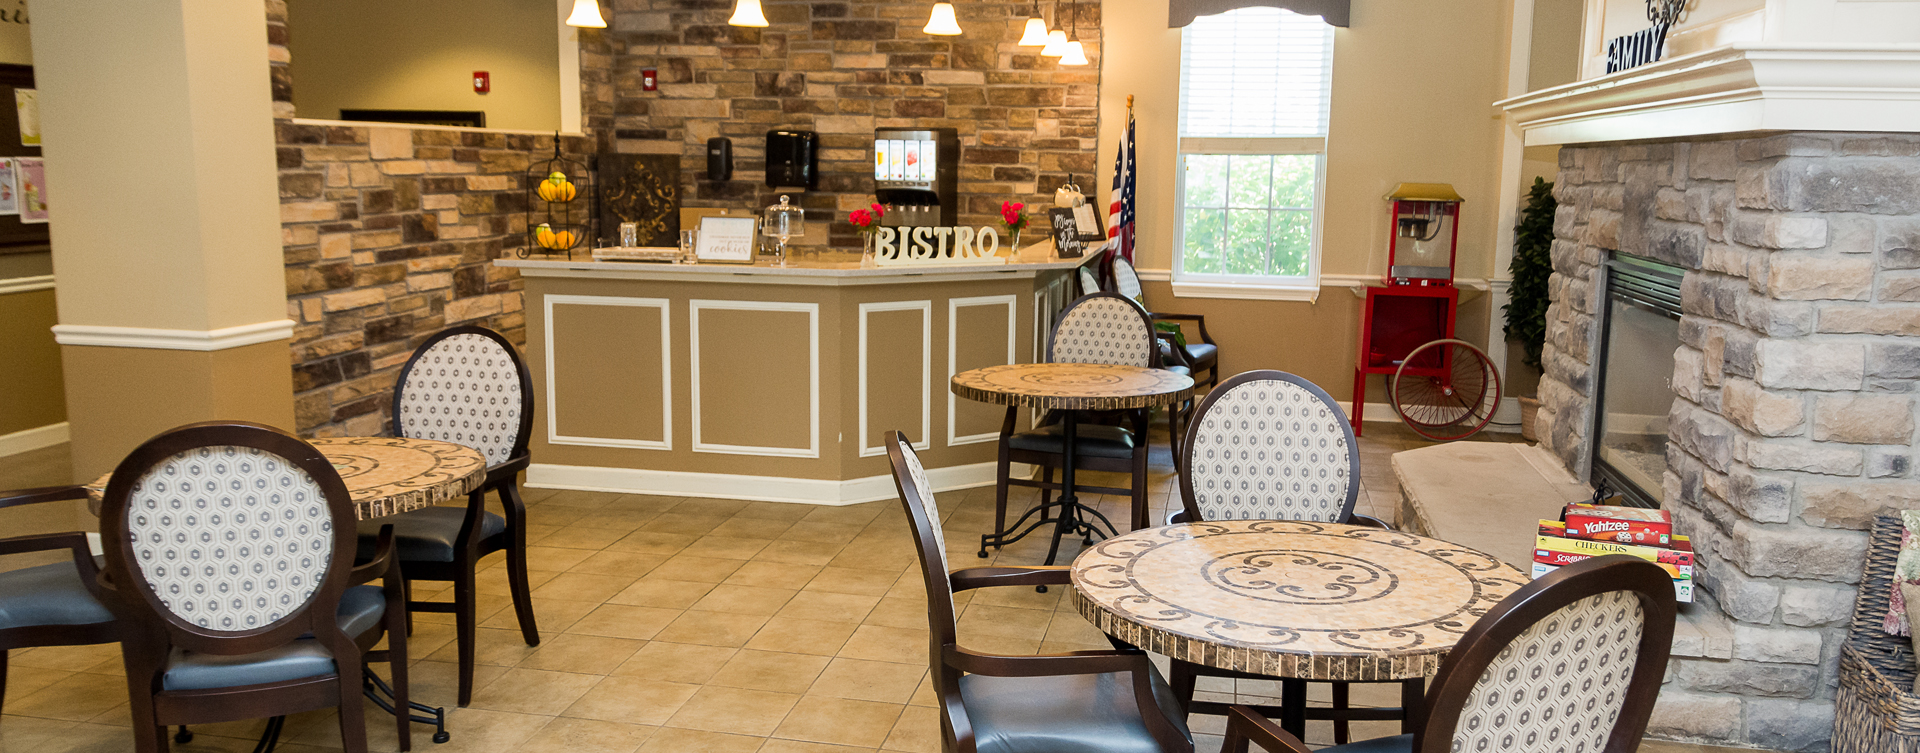 Intimate enough to entertain your closest family; you can even host your next get together in the bistro at Bickford of Oswego